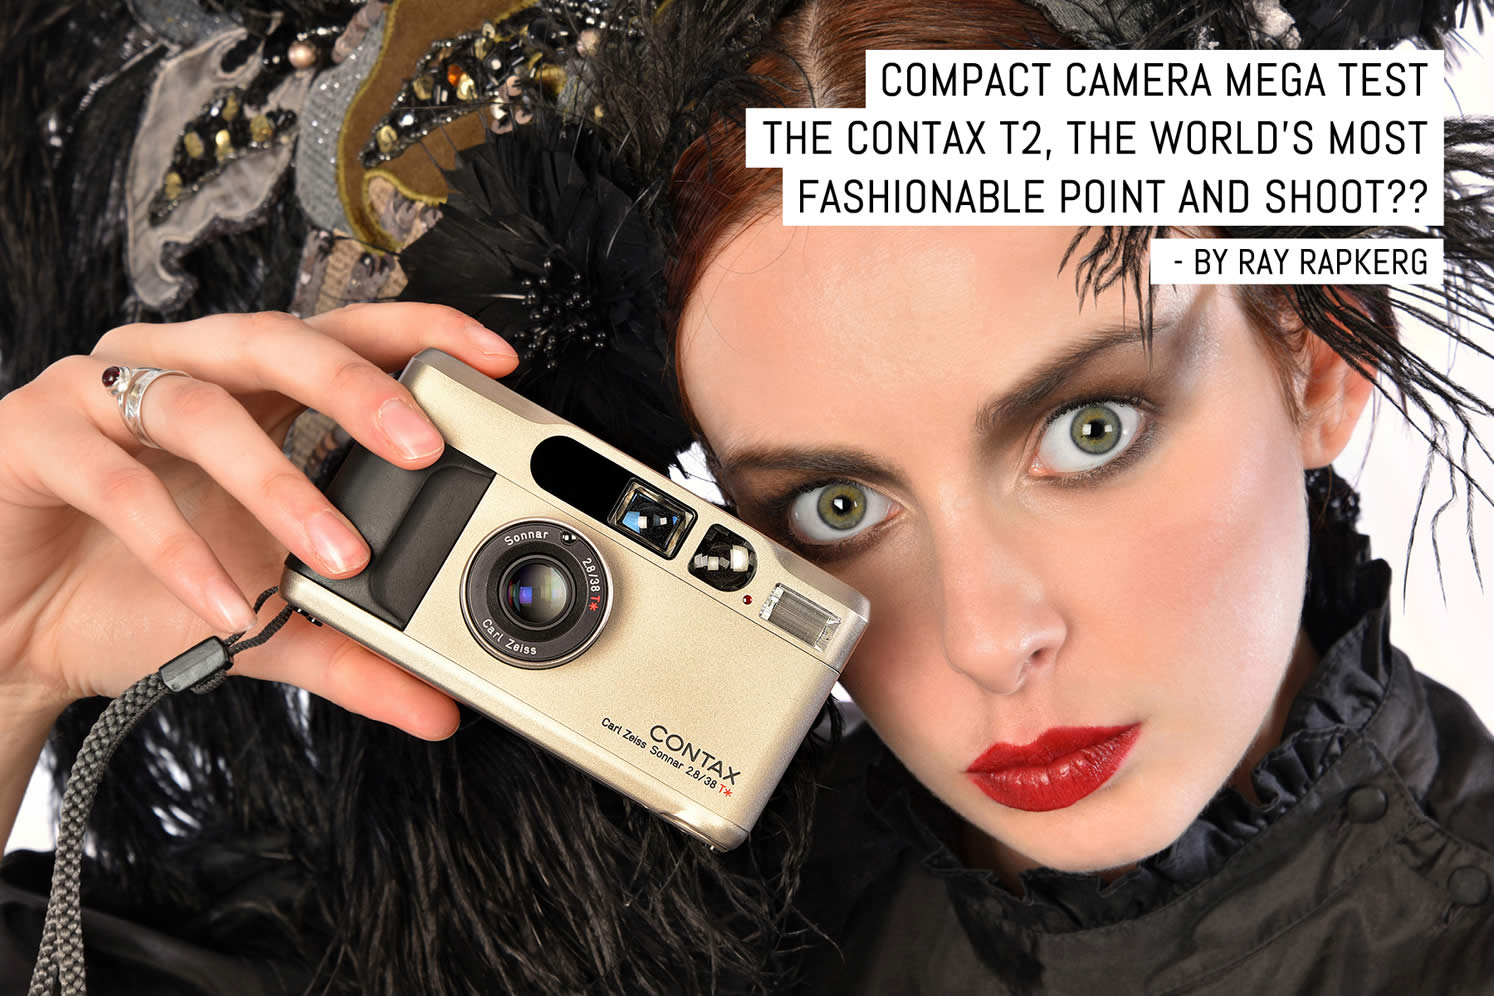 Compact camera mega test: The Contax T2, the world’s most fashionable point and shoot??